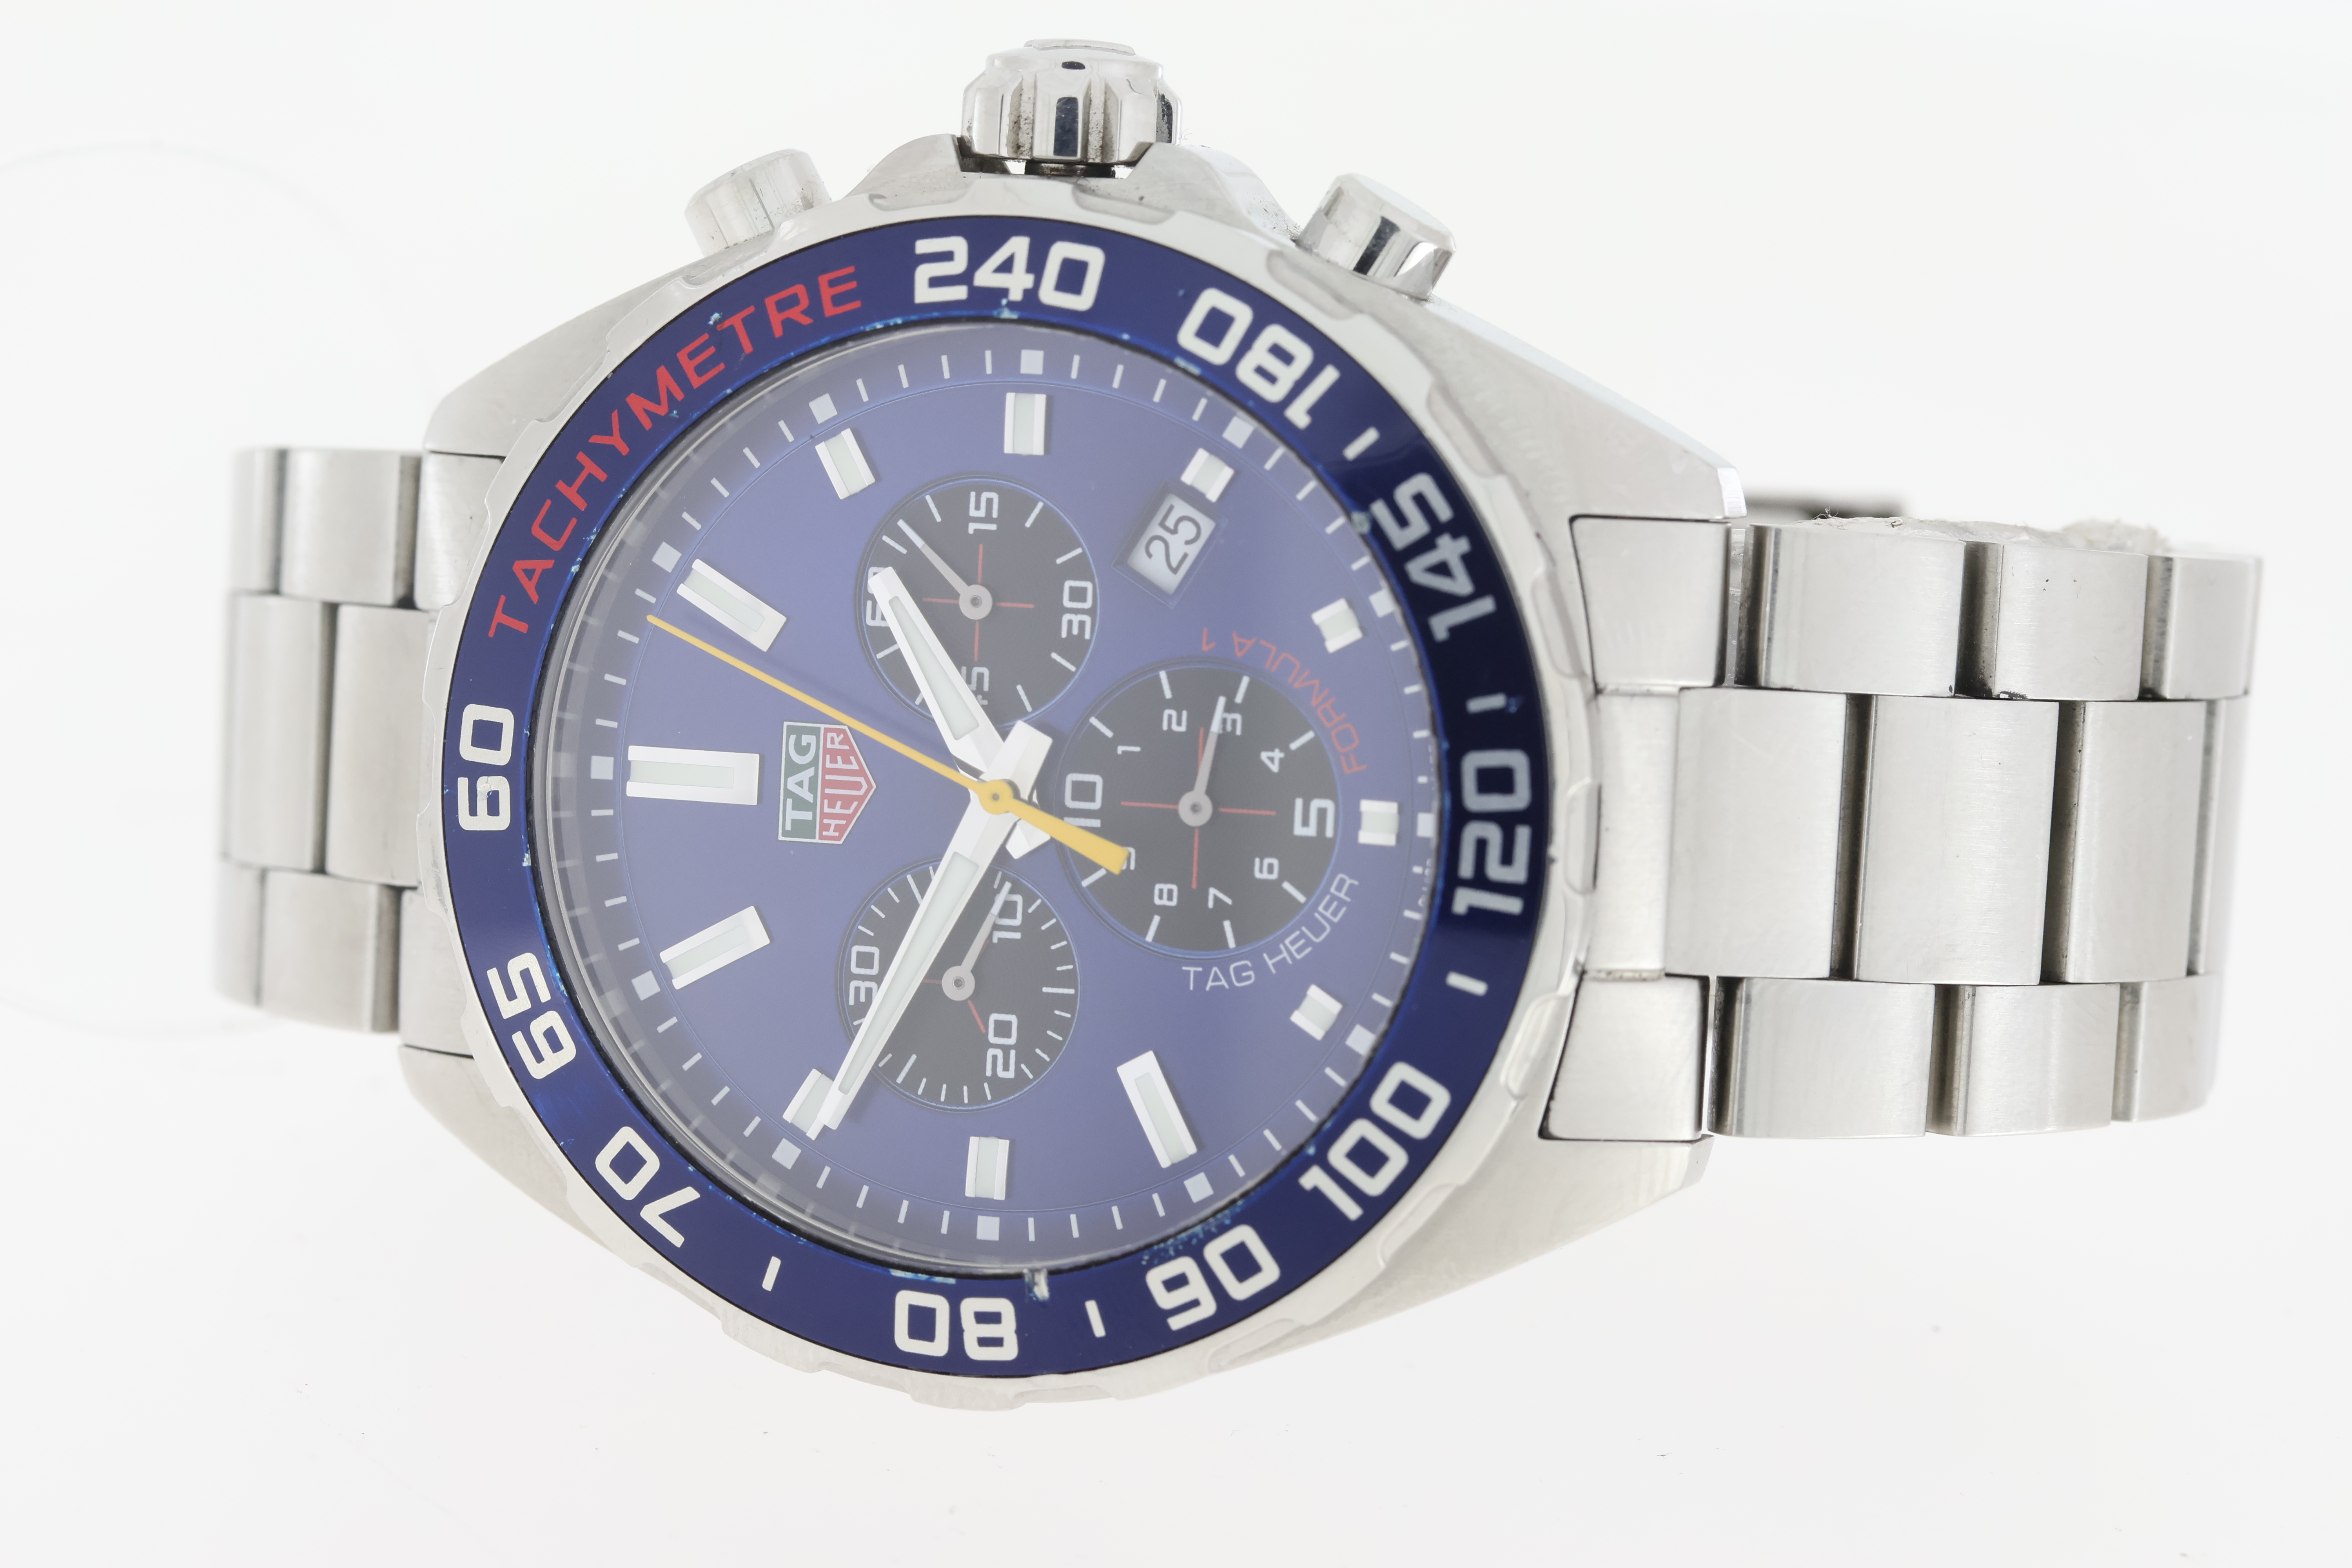 Special Edition Tag Heuer Formula 1 'Aston Martin, Red Bull Racing' Date Quartz - Image 2 of 4